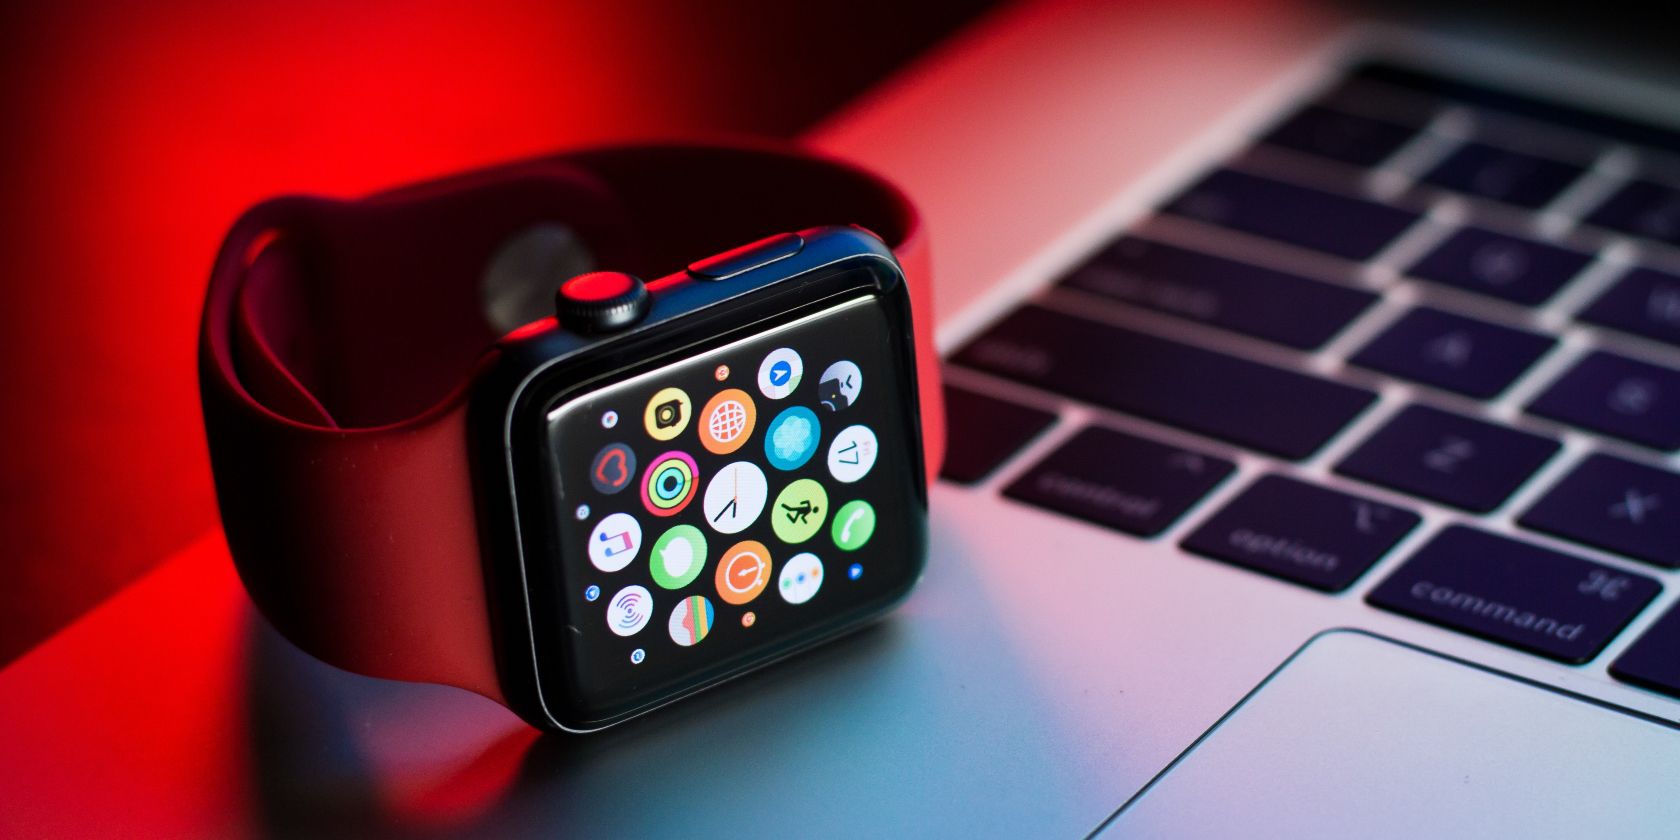 Photo of an Apple Watch on top of a Mac